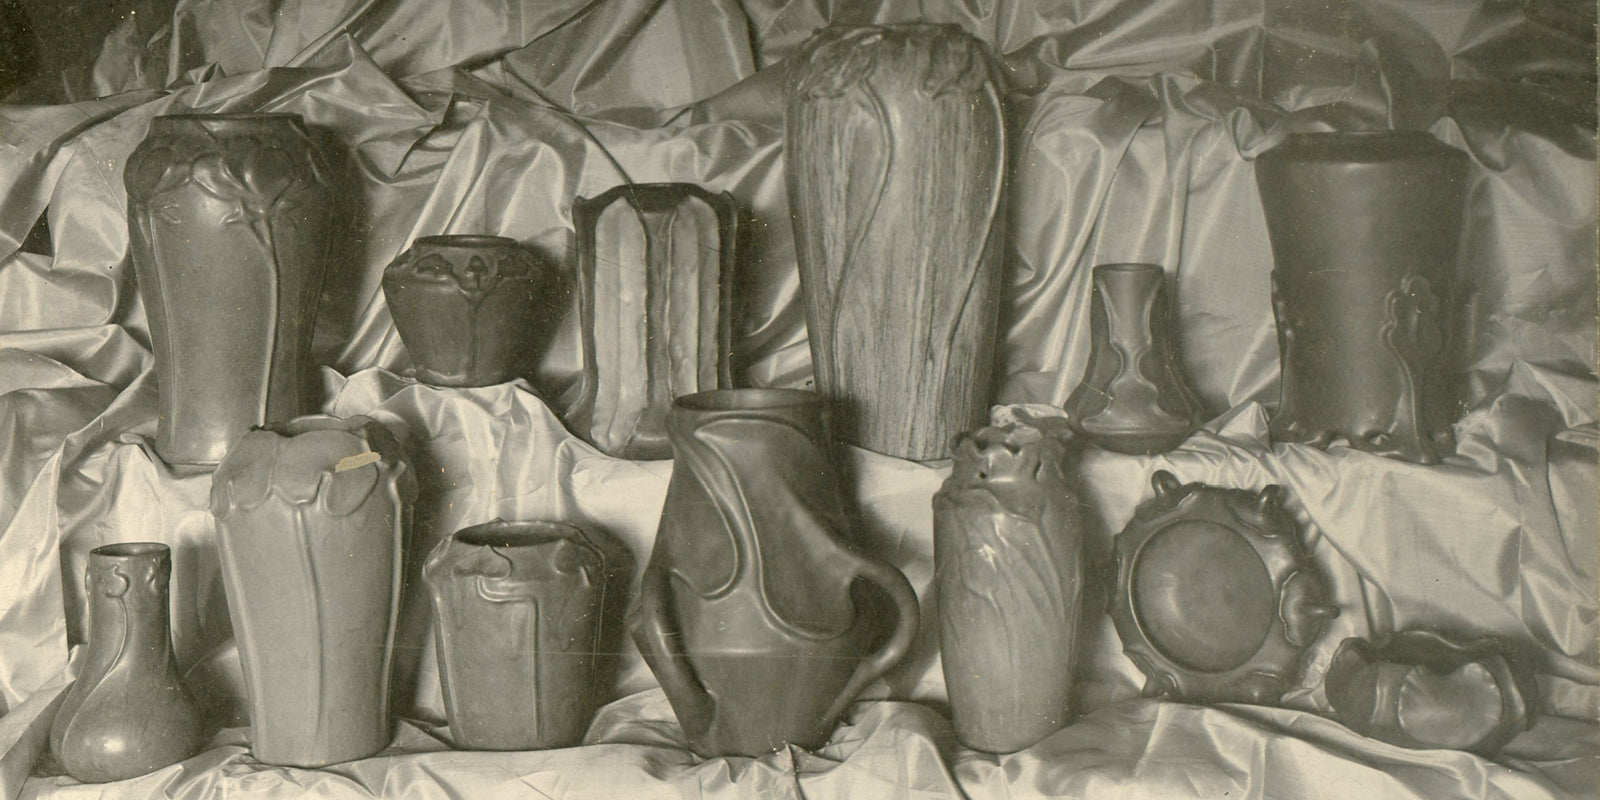 Sepia photo scan of a variety of early Pewabic vases at the Stable Studio in the early 1900s.